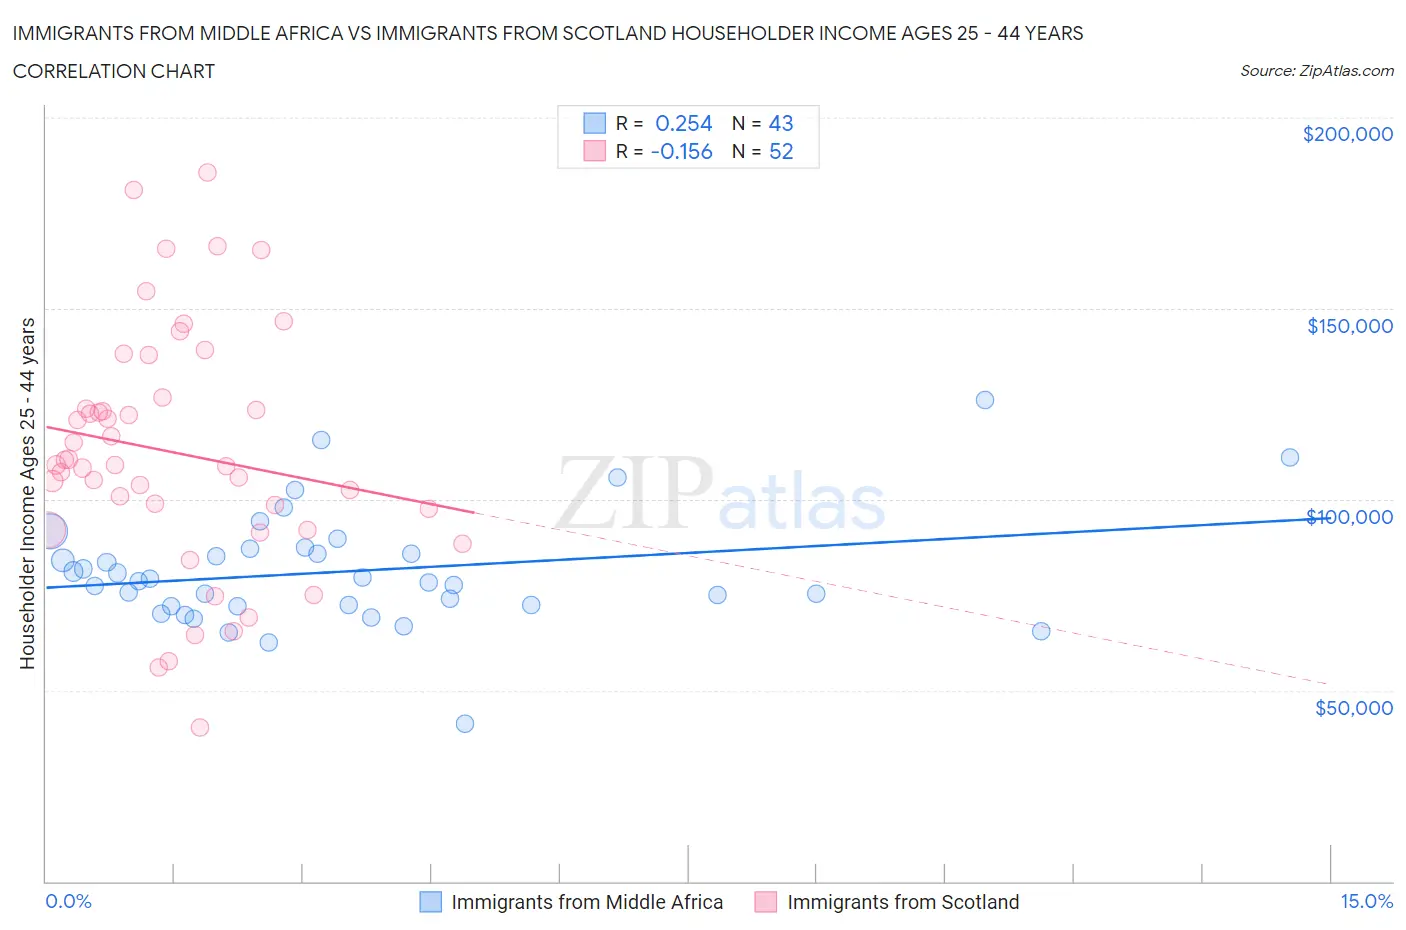 Immigrants from Middle Africa vs Immigrants from Scotland Householder Income Ages 25 - 44 years